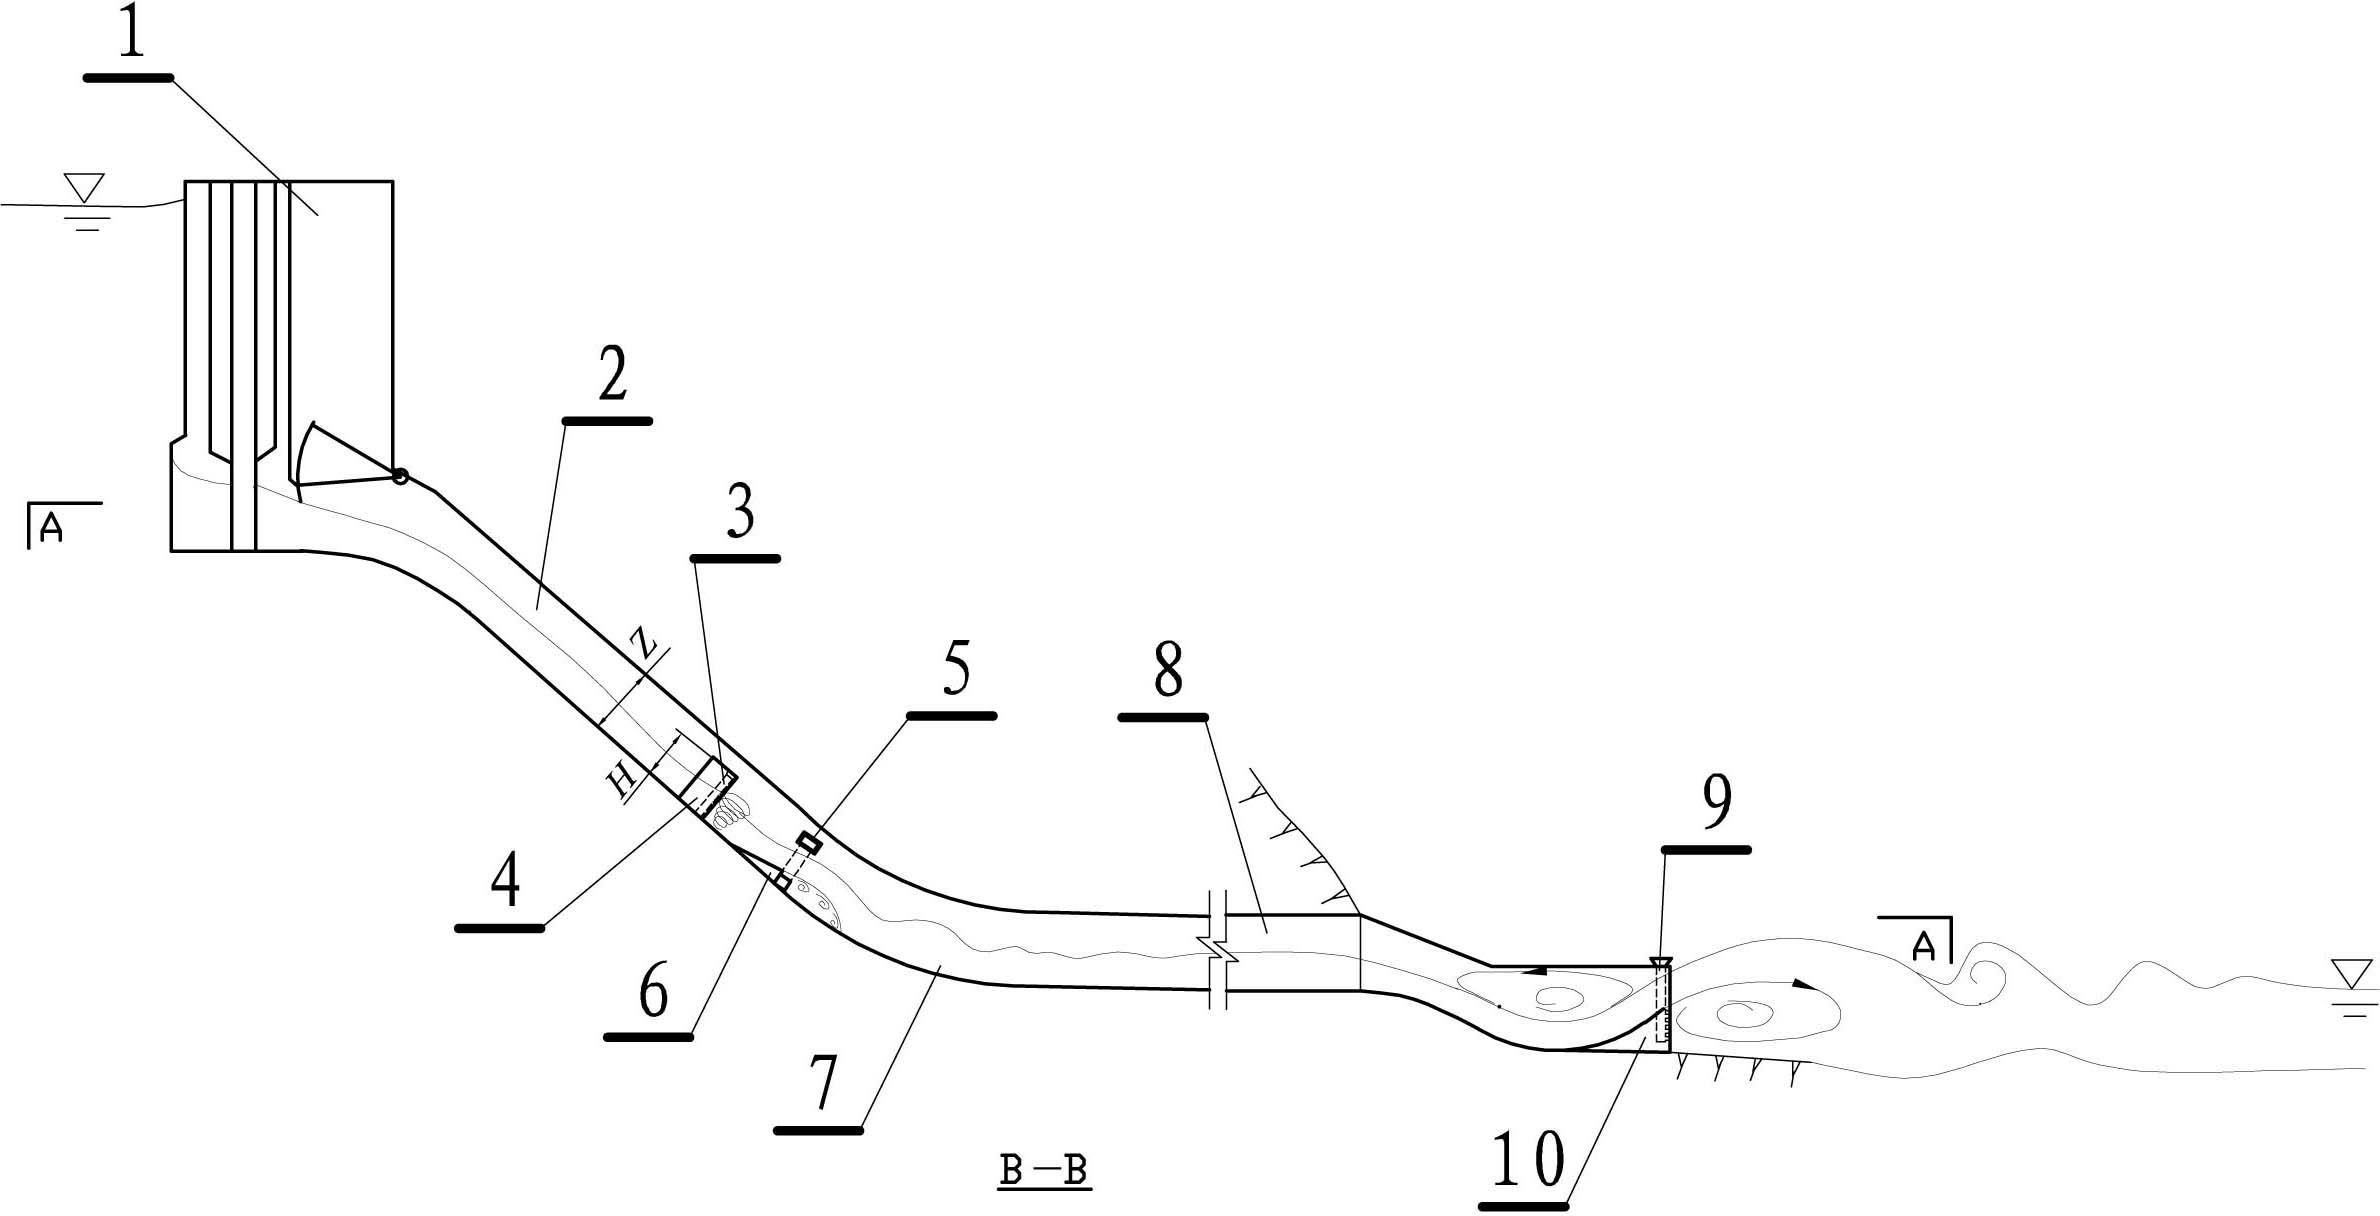 Energy dissipation method of sidewall aeration steps and outlet submerged flip bucket of inclined shaft type flood discharge tunnel